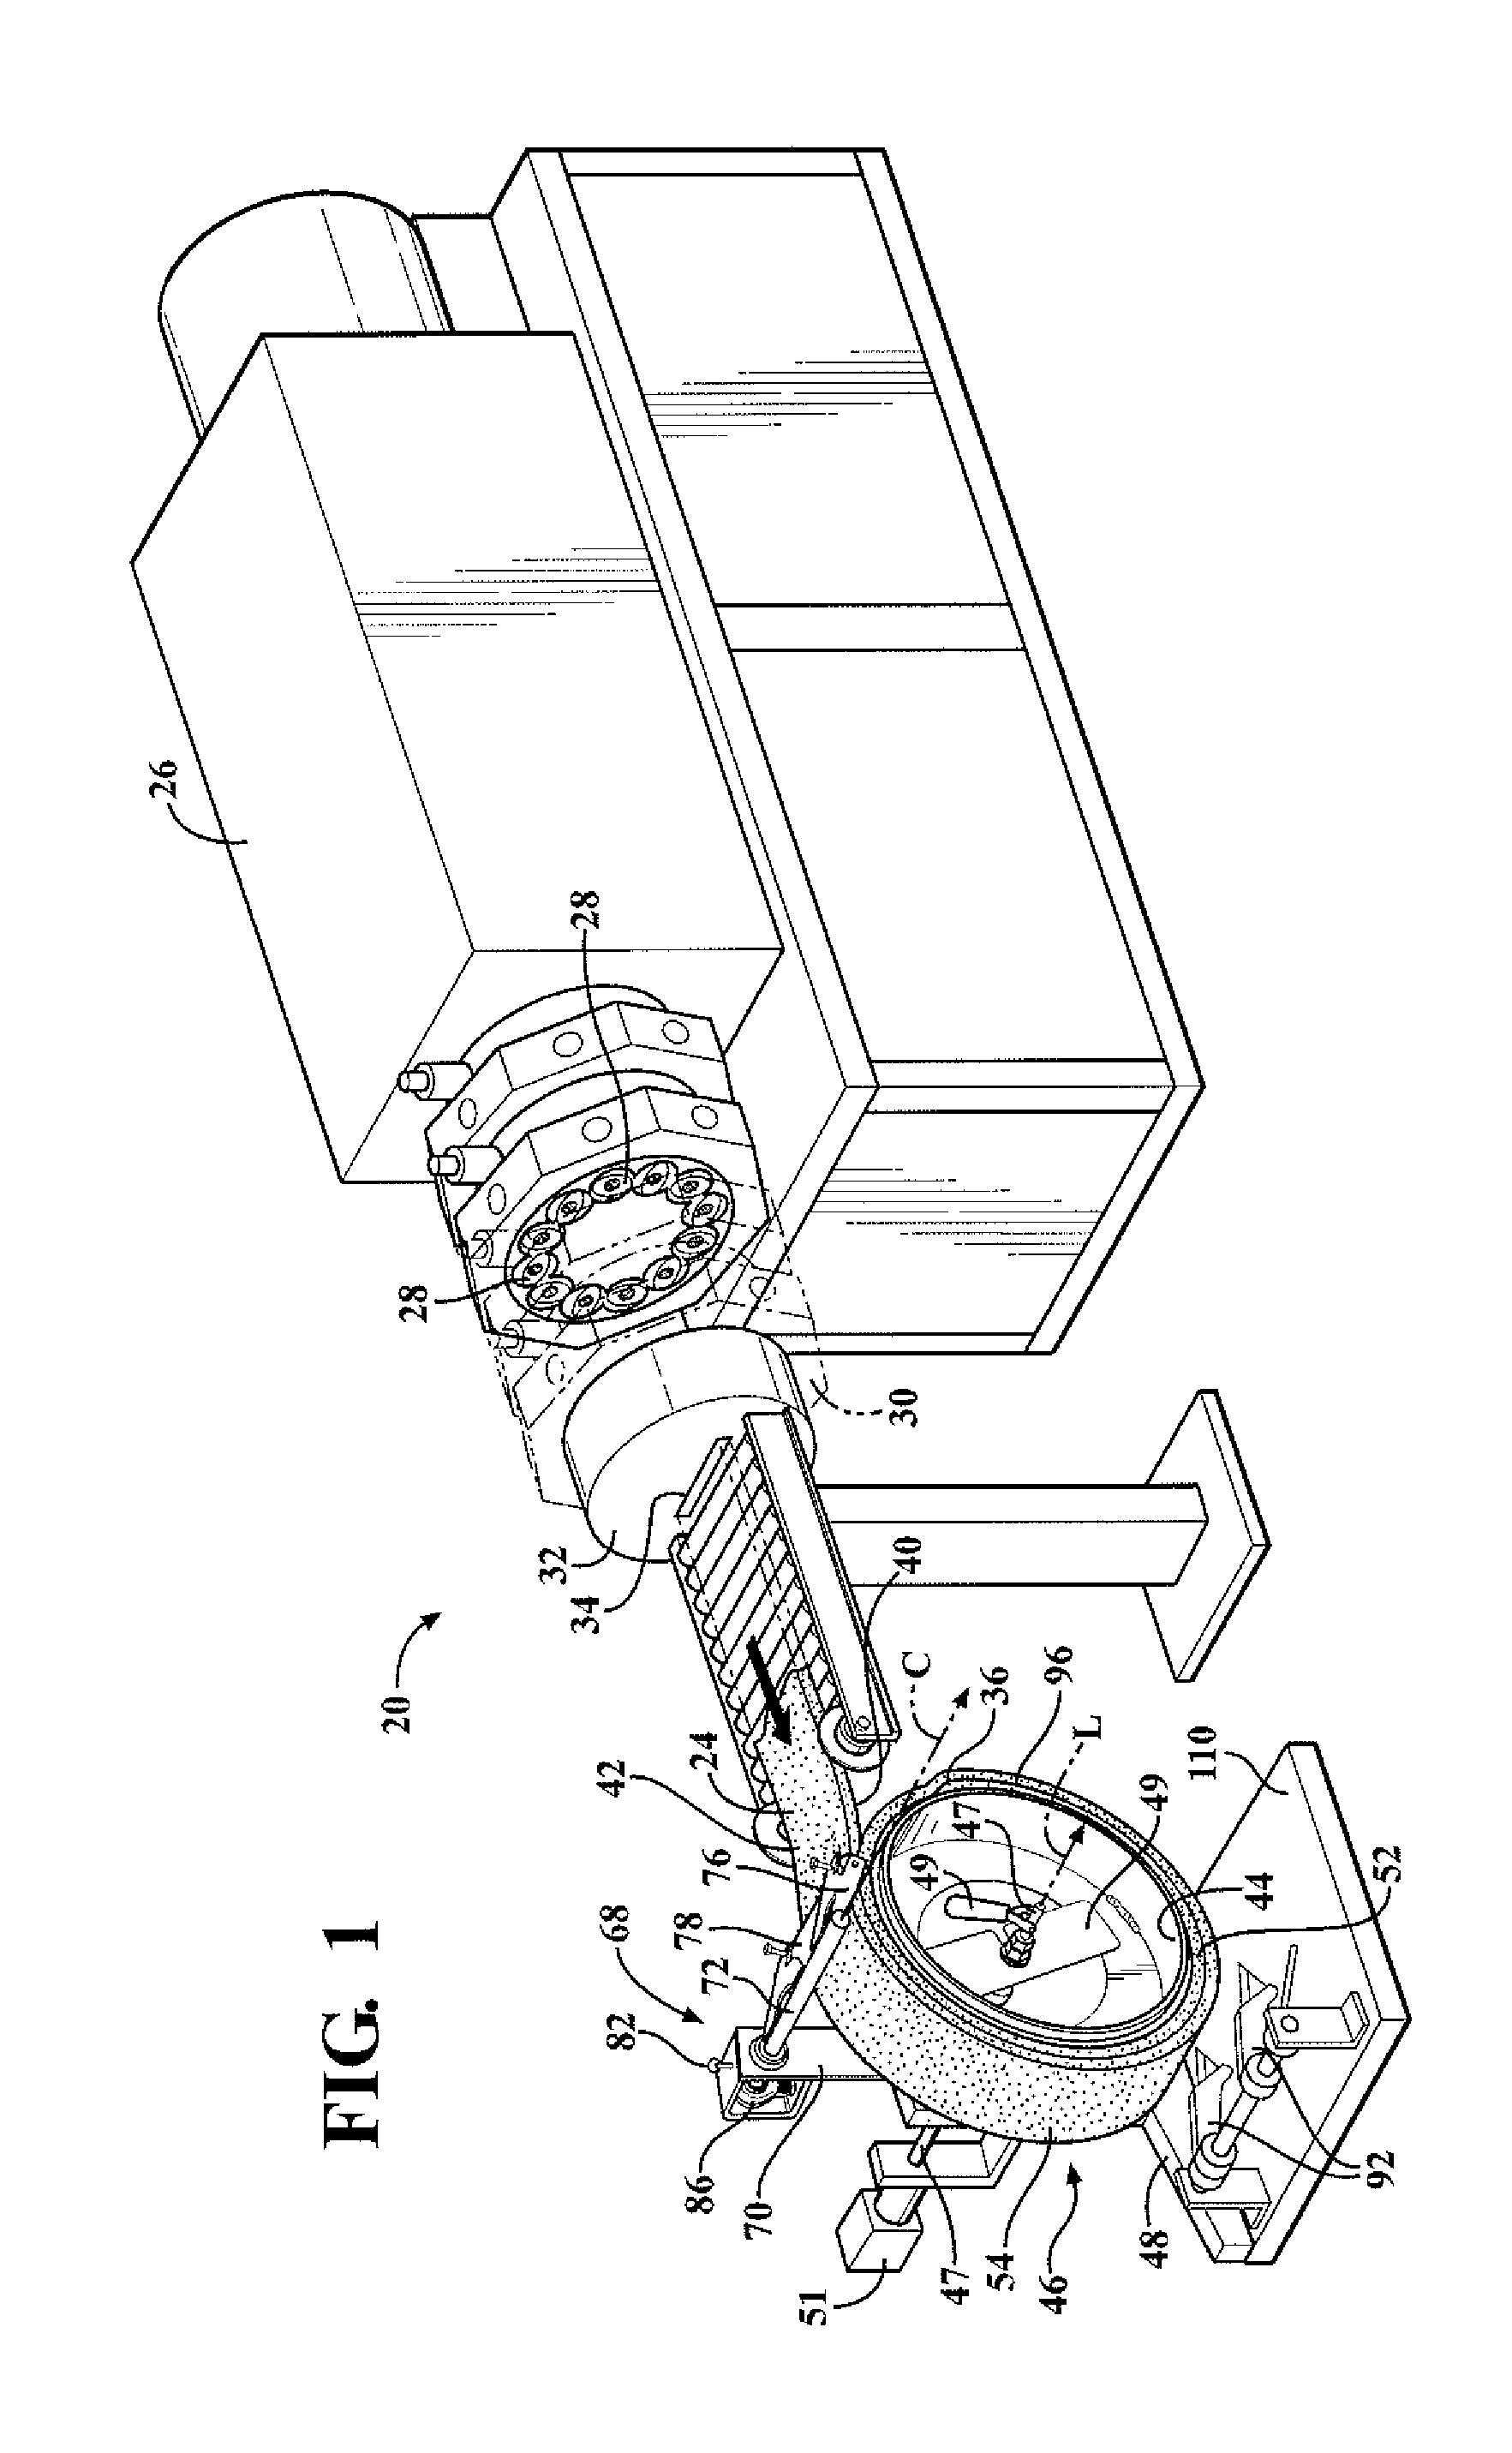 Manufacturing Apparatus And Method Of Forming A Preform